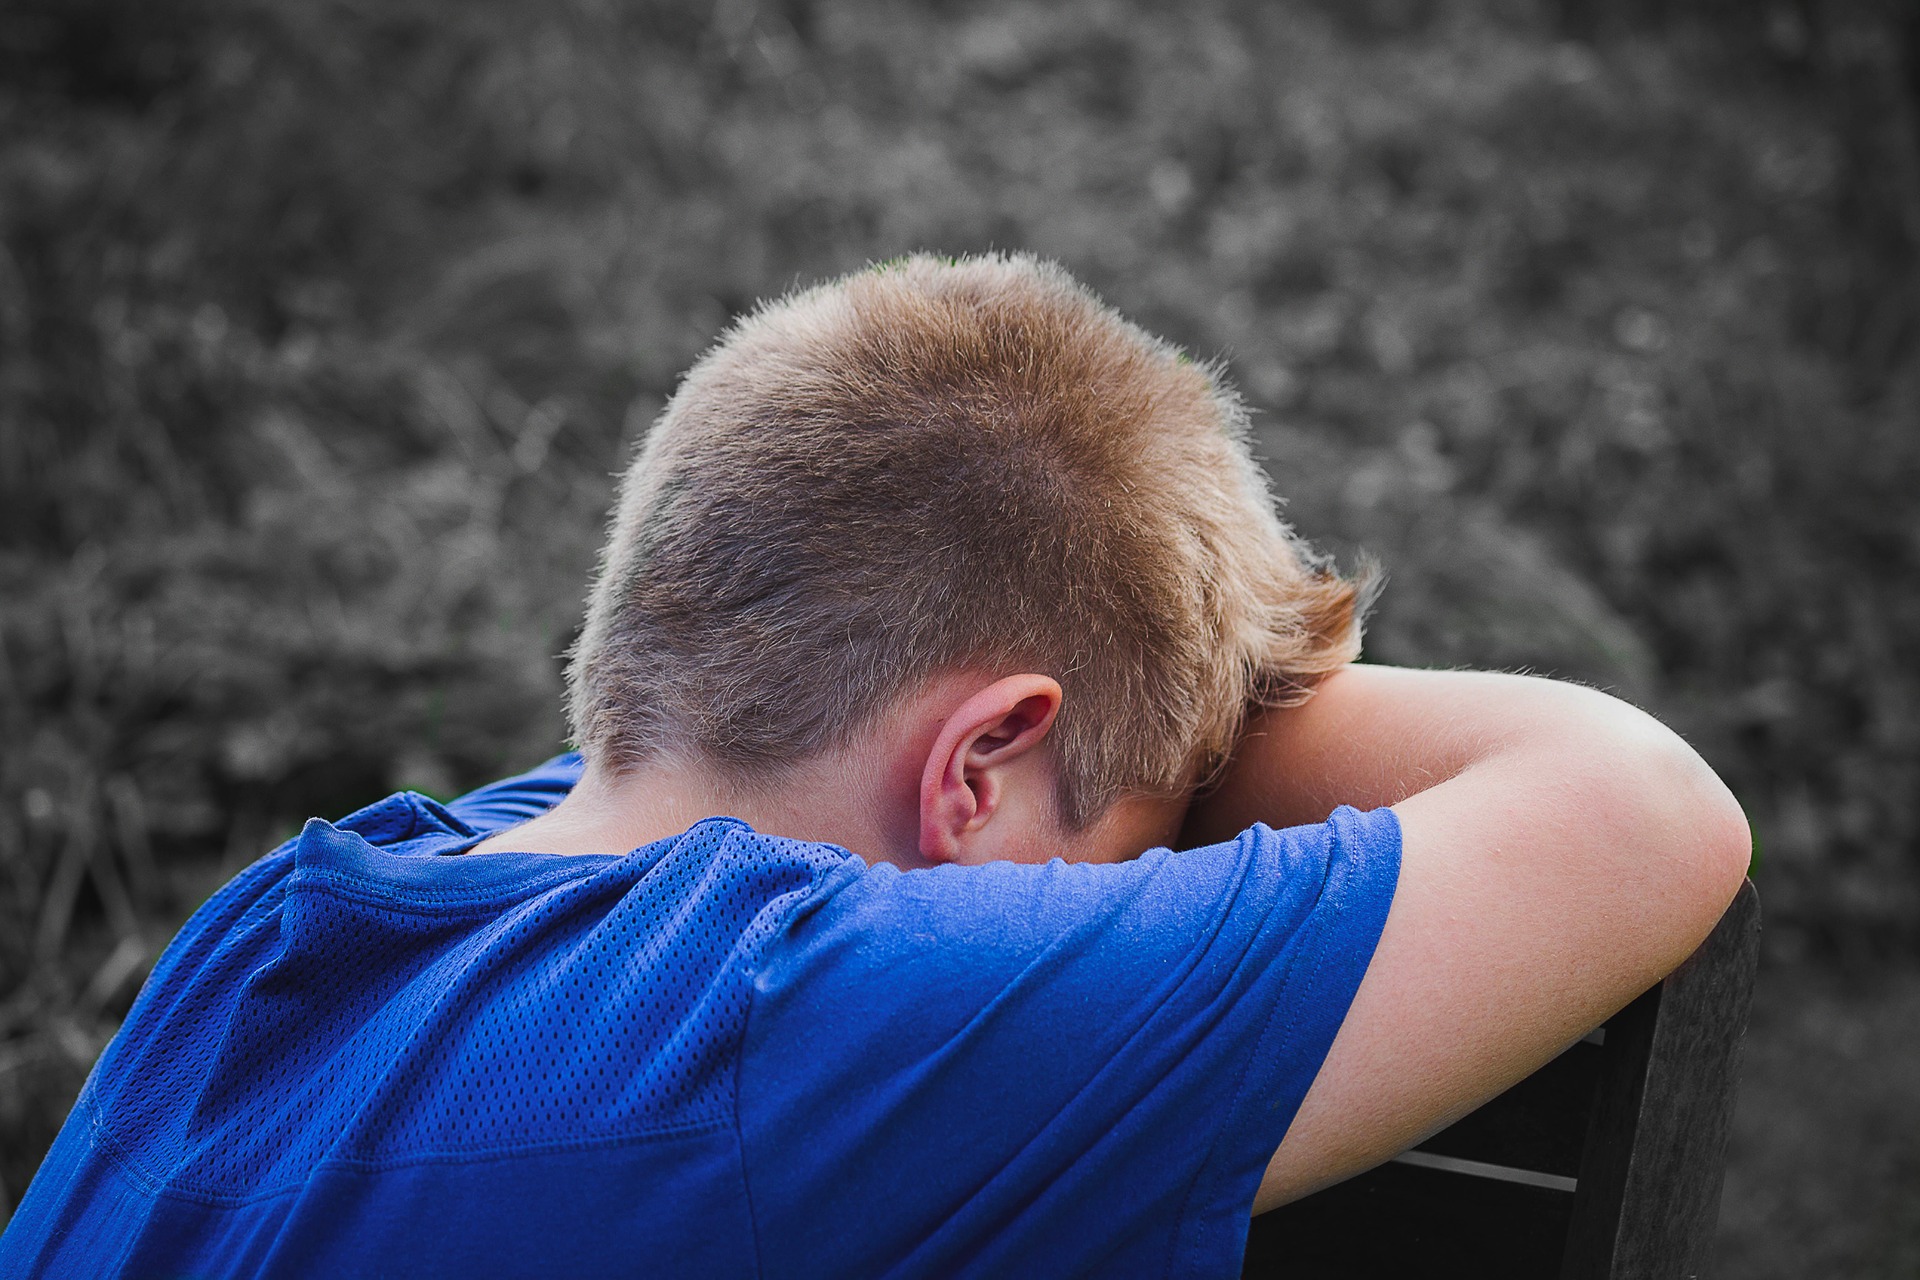 Bullying can leave young people feeling isolated and helpless.